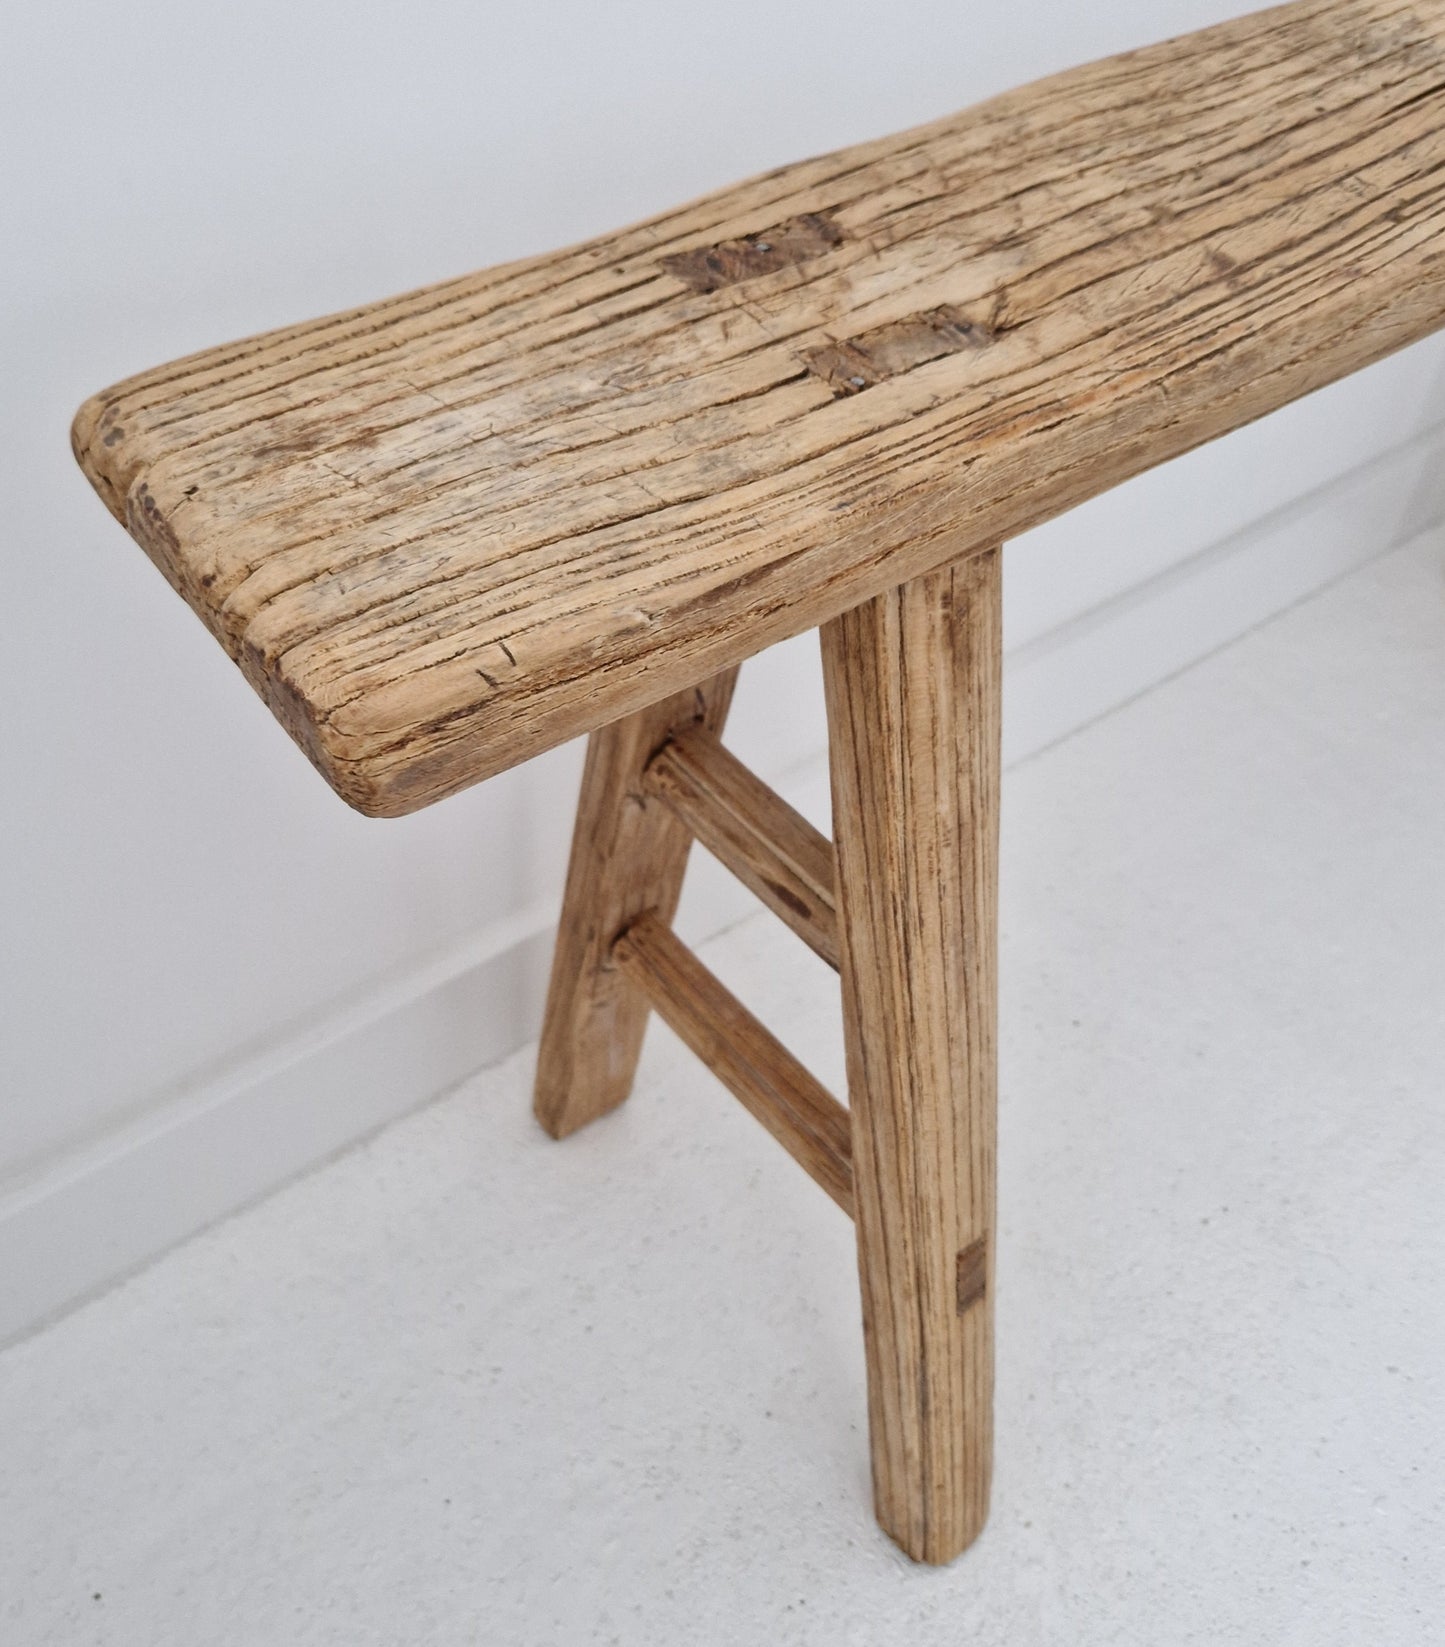 Old wooden bench #5 (118,5cm)